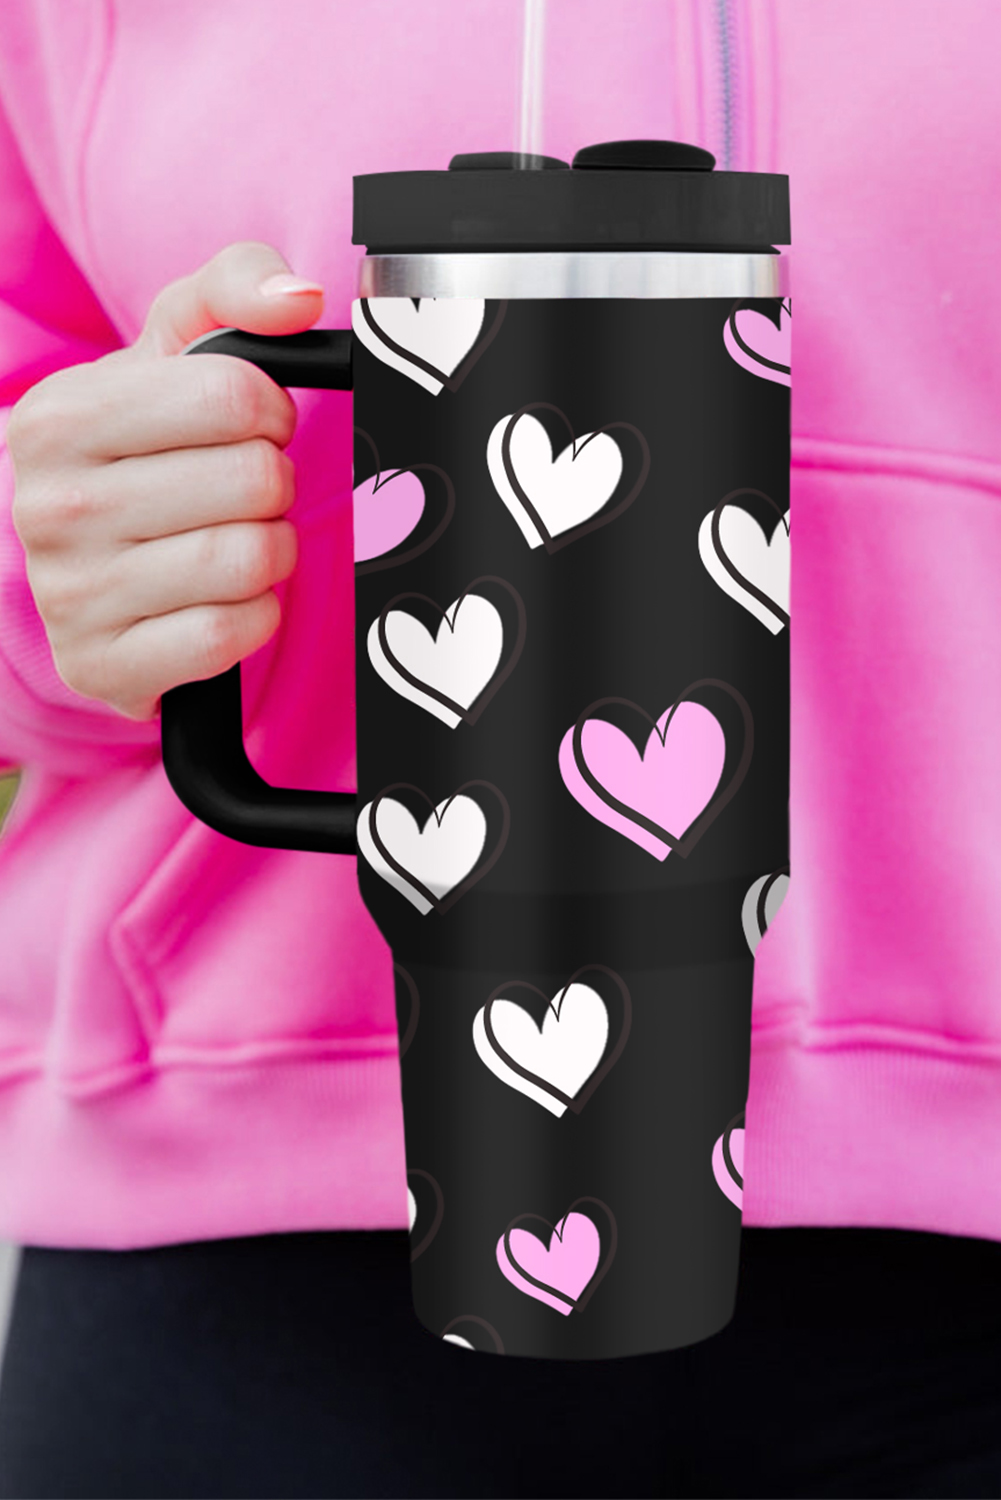  Black VALENTINEs Heart Printed Thermos Cup with Handle